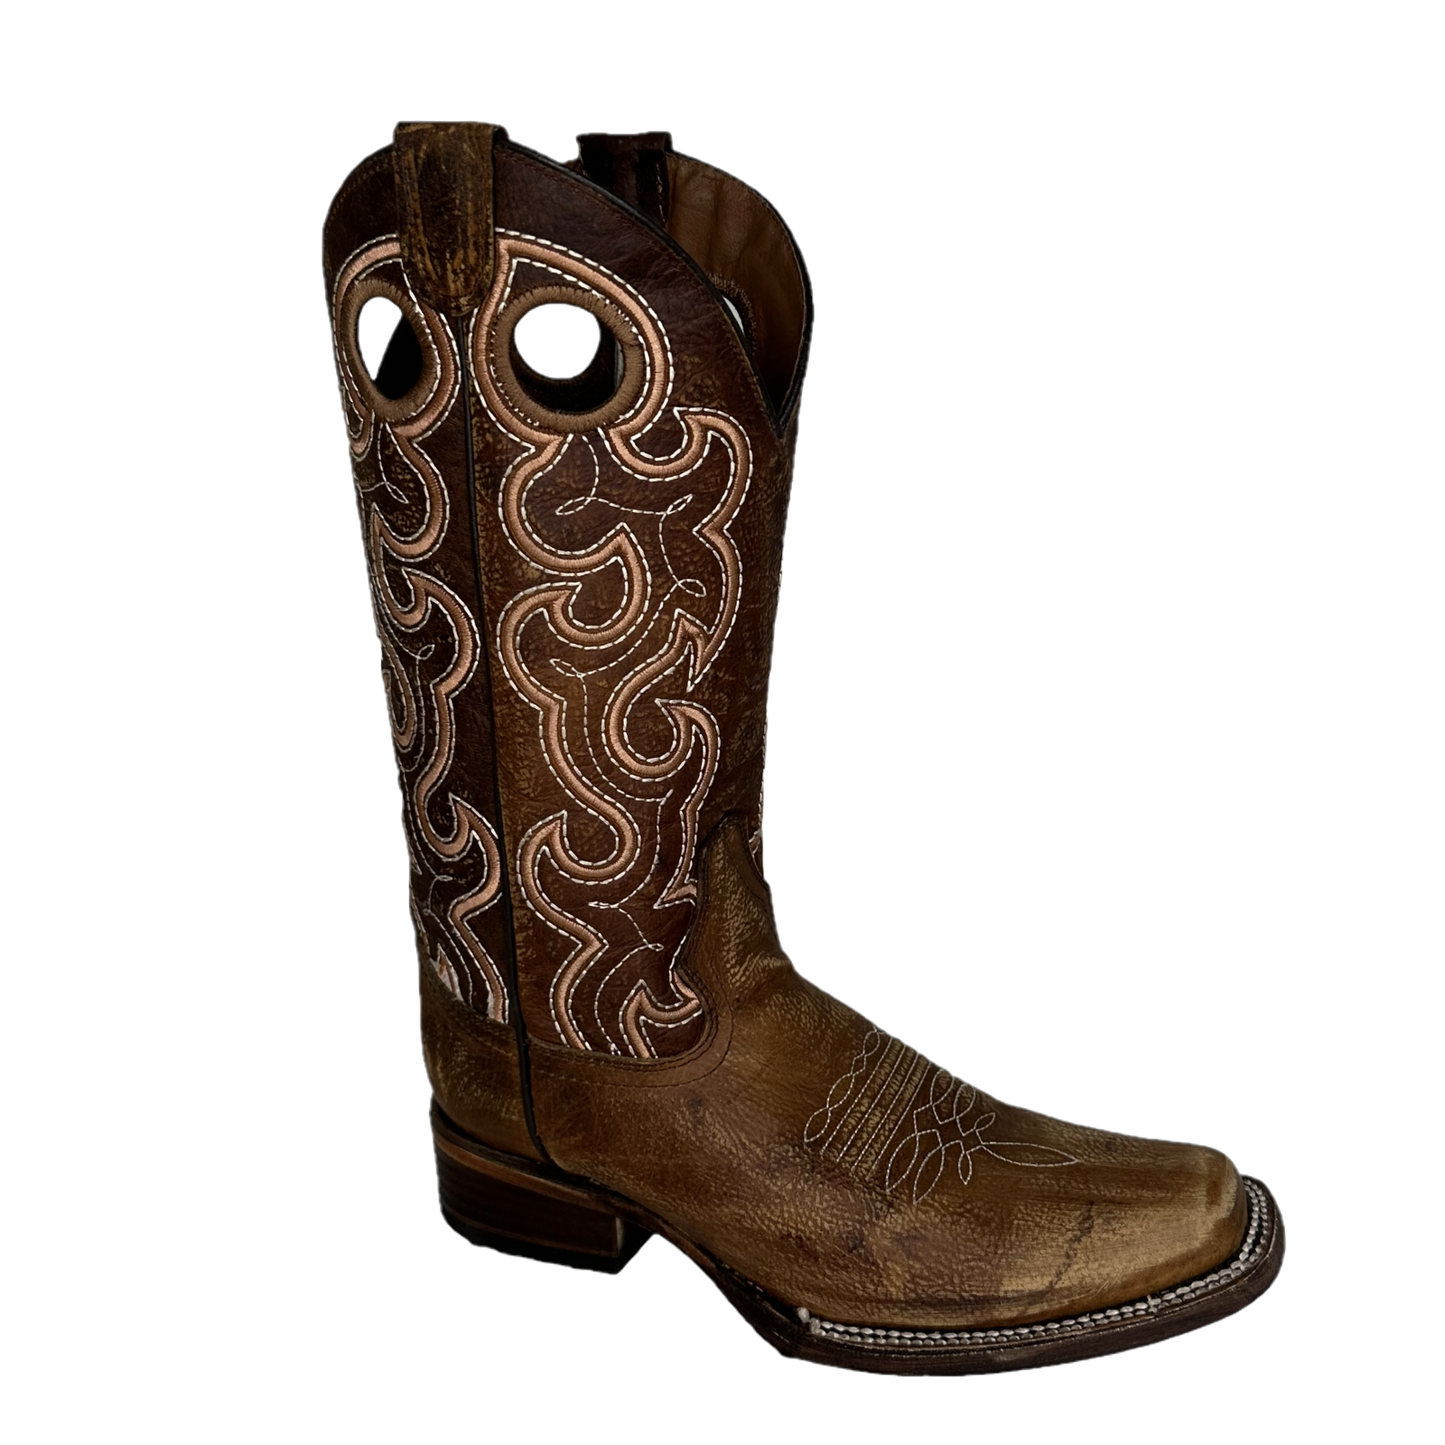 Circle G Ladies Cutout Embroidery Cognac Brown Square Toe Boots L6008